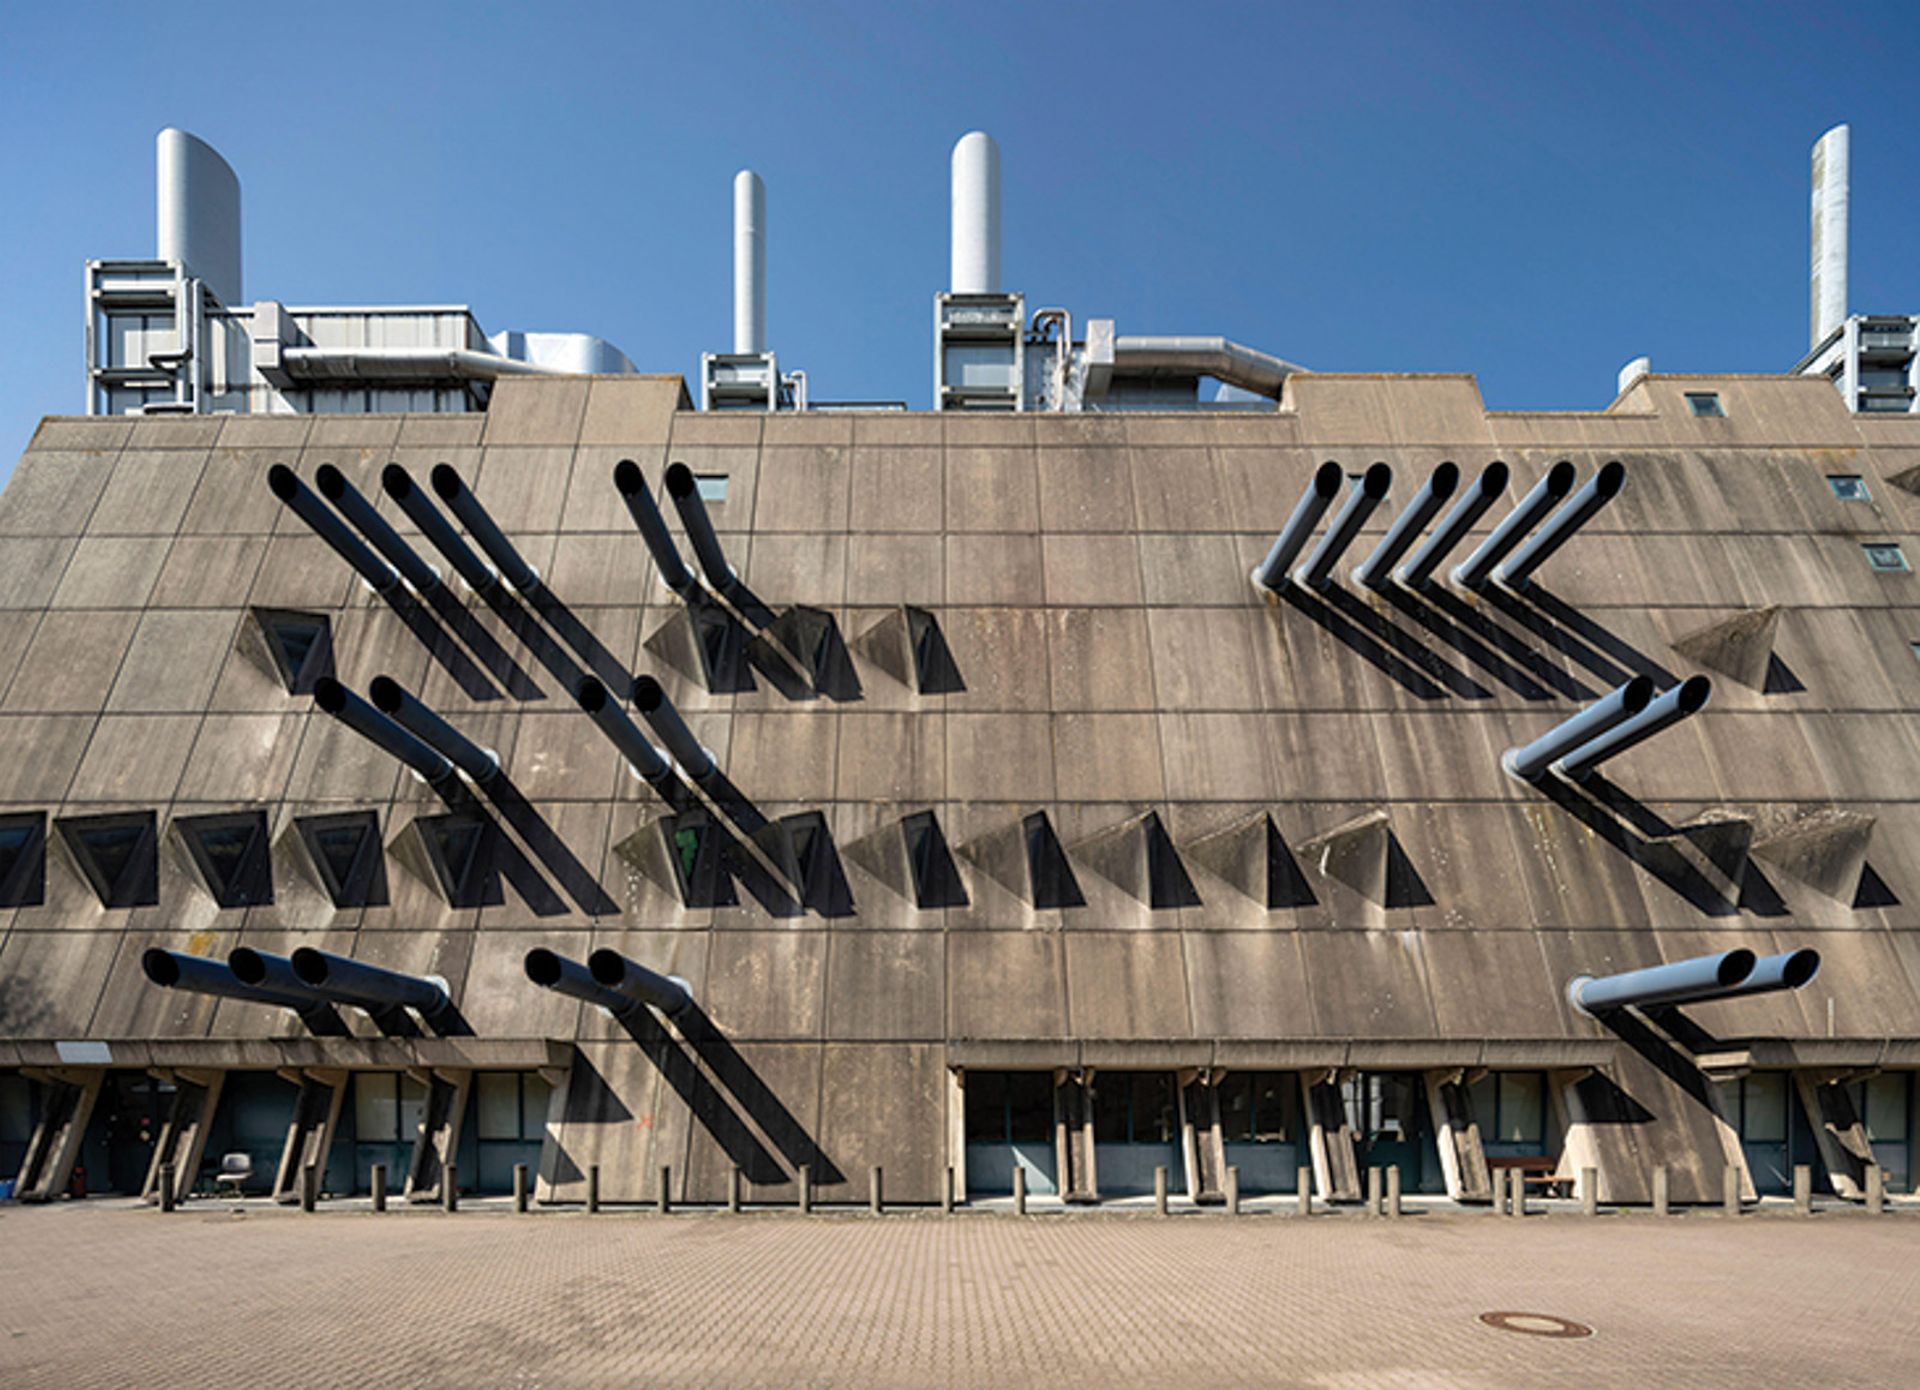 Protruding ventilation pipes and slit windows make the 1981 building resemble a warship Florian Monheim/Alamy